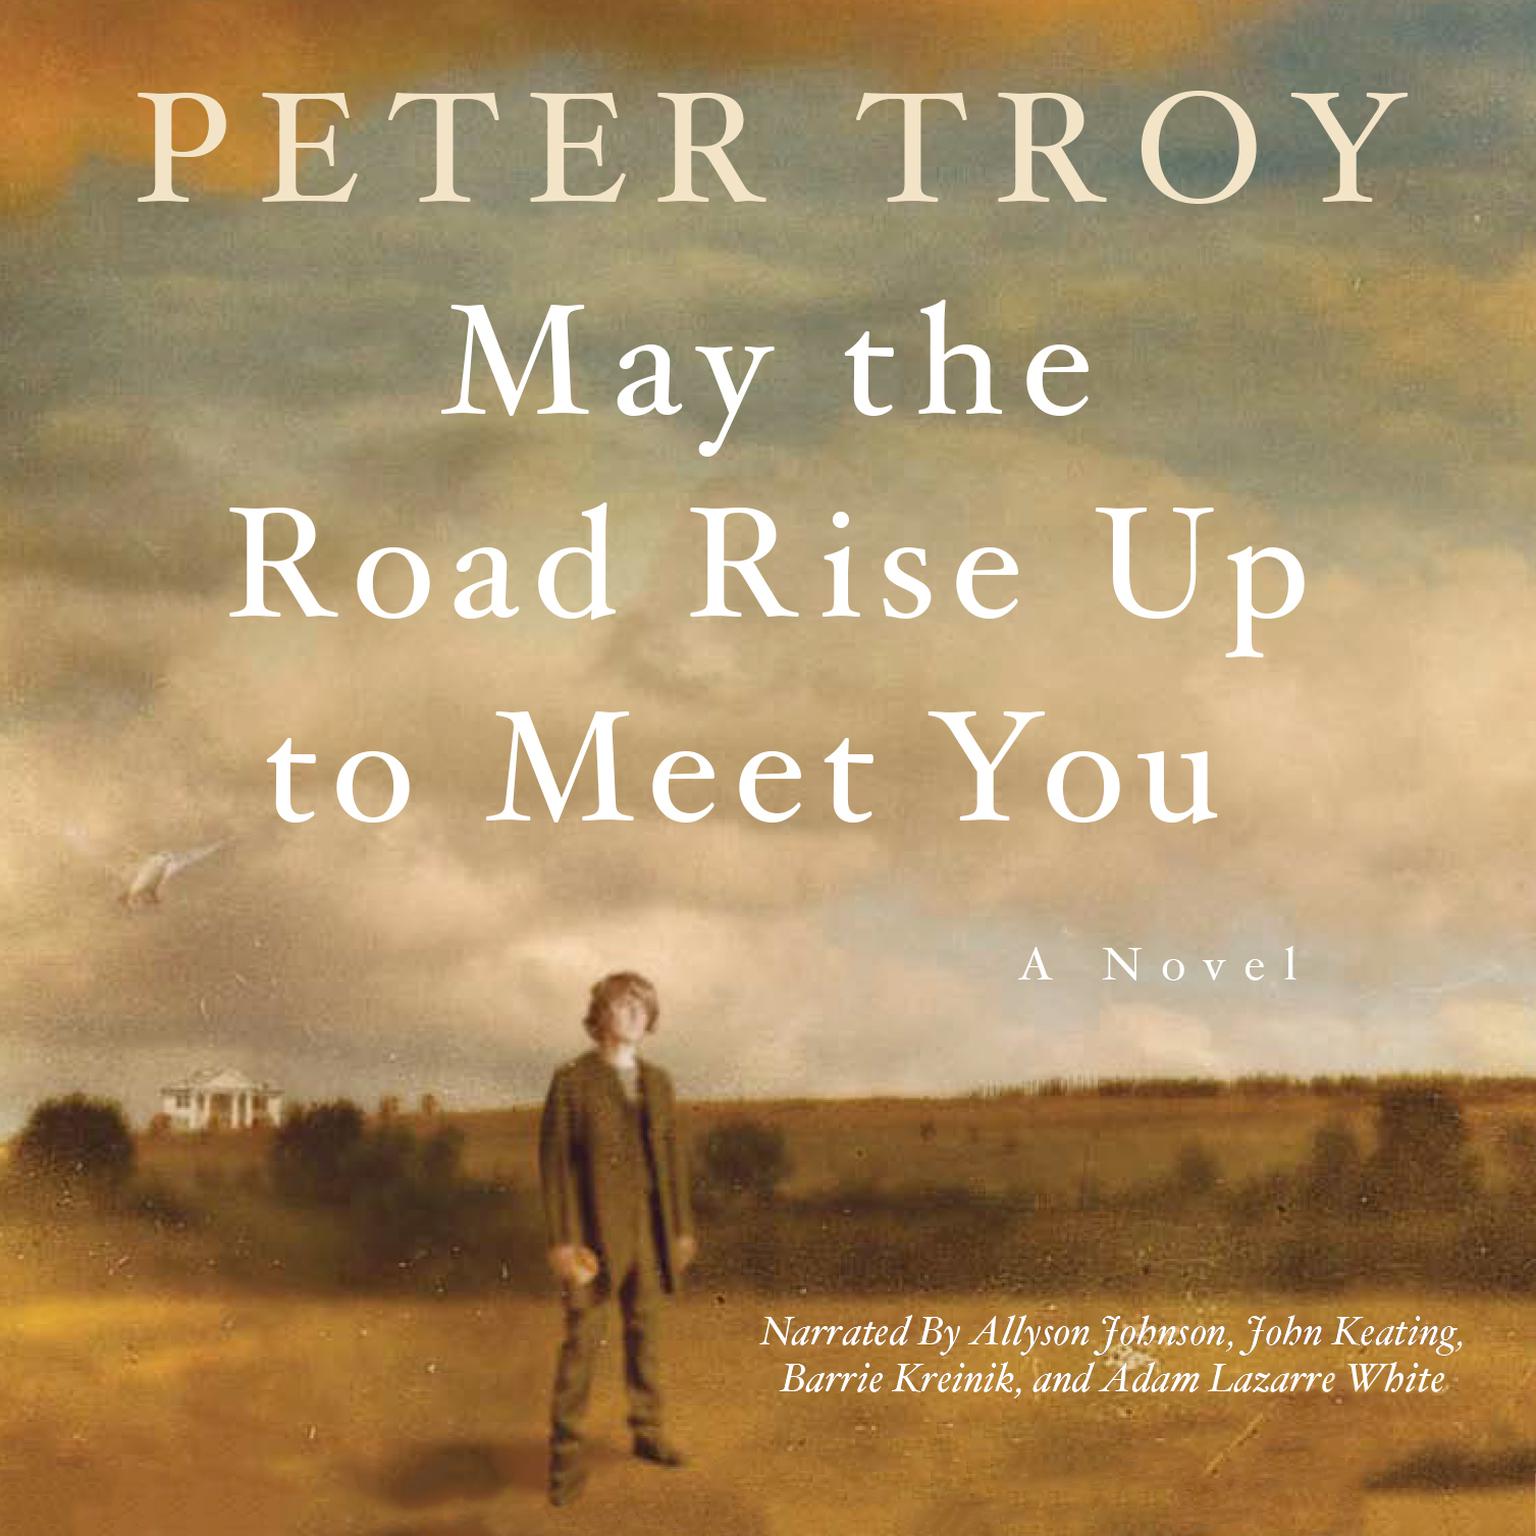 May the Road Rise Up to Meet You: A Novel Audiobook, by Peter Troy